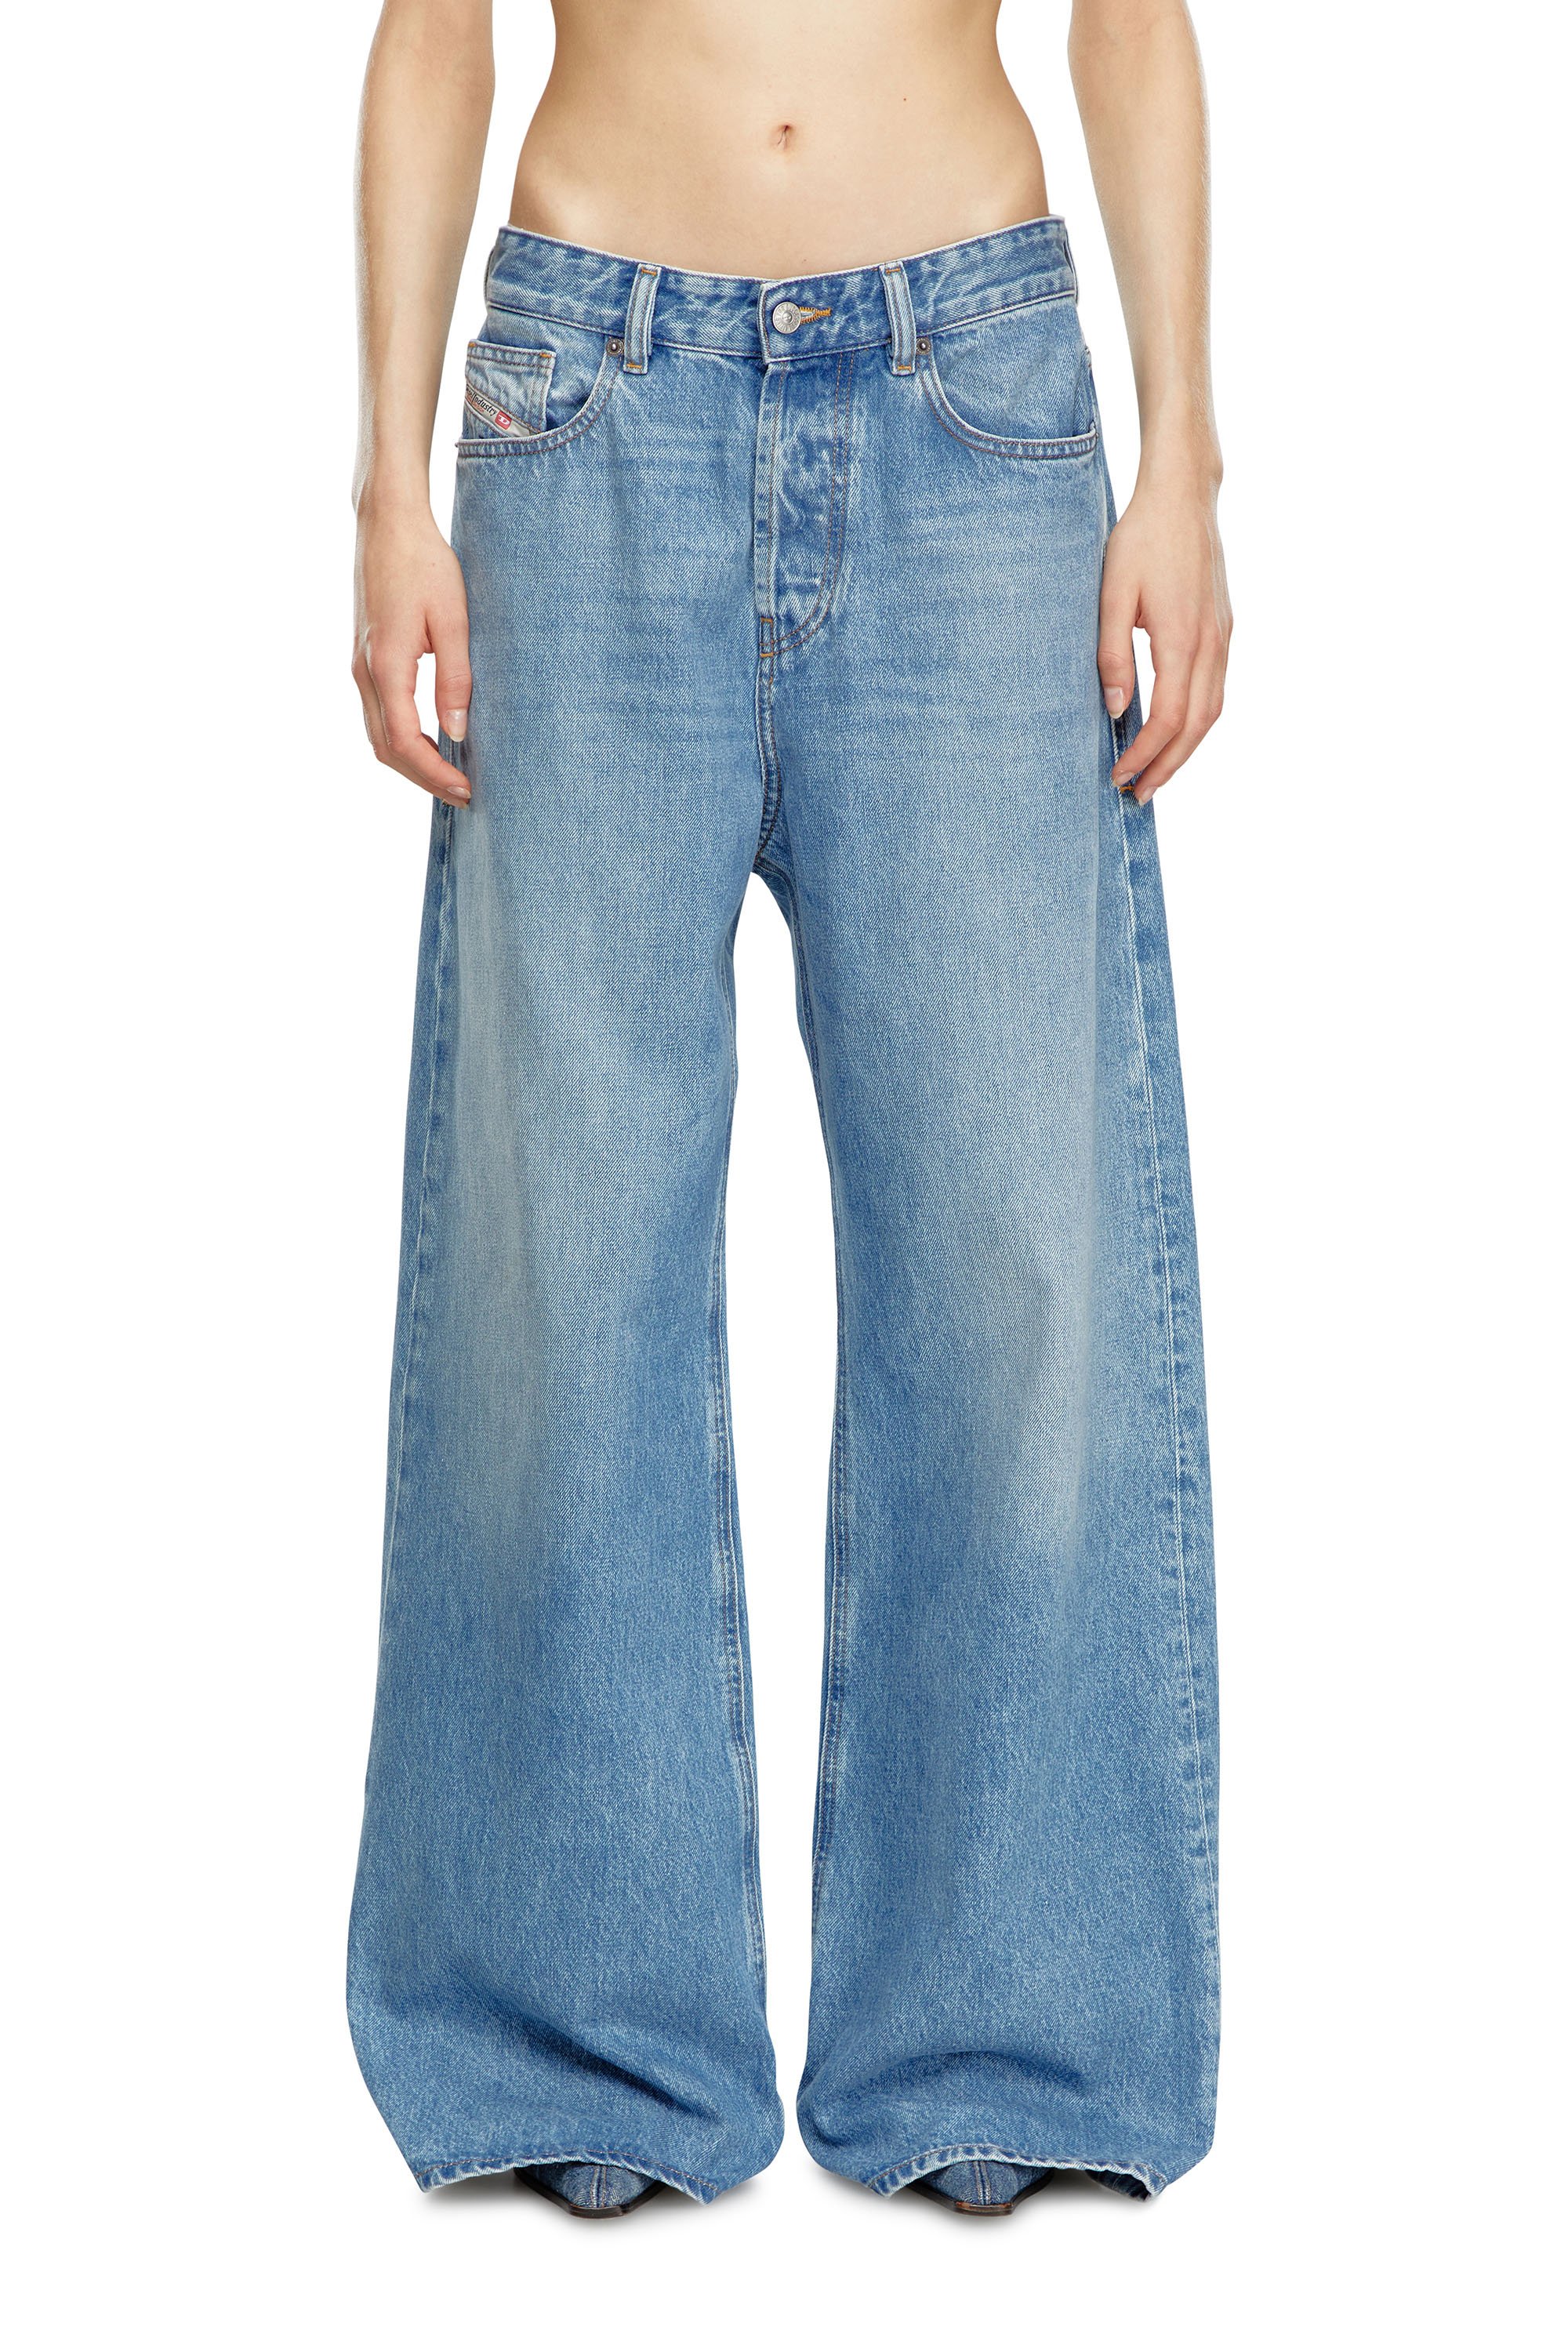 Diesel - Straight Jeans 1996 D-Sire 09I29, Mujer Straight Jeans - 1996 D-Sire in Azul marino - Image 1